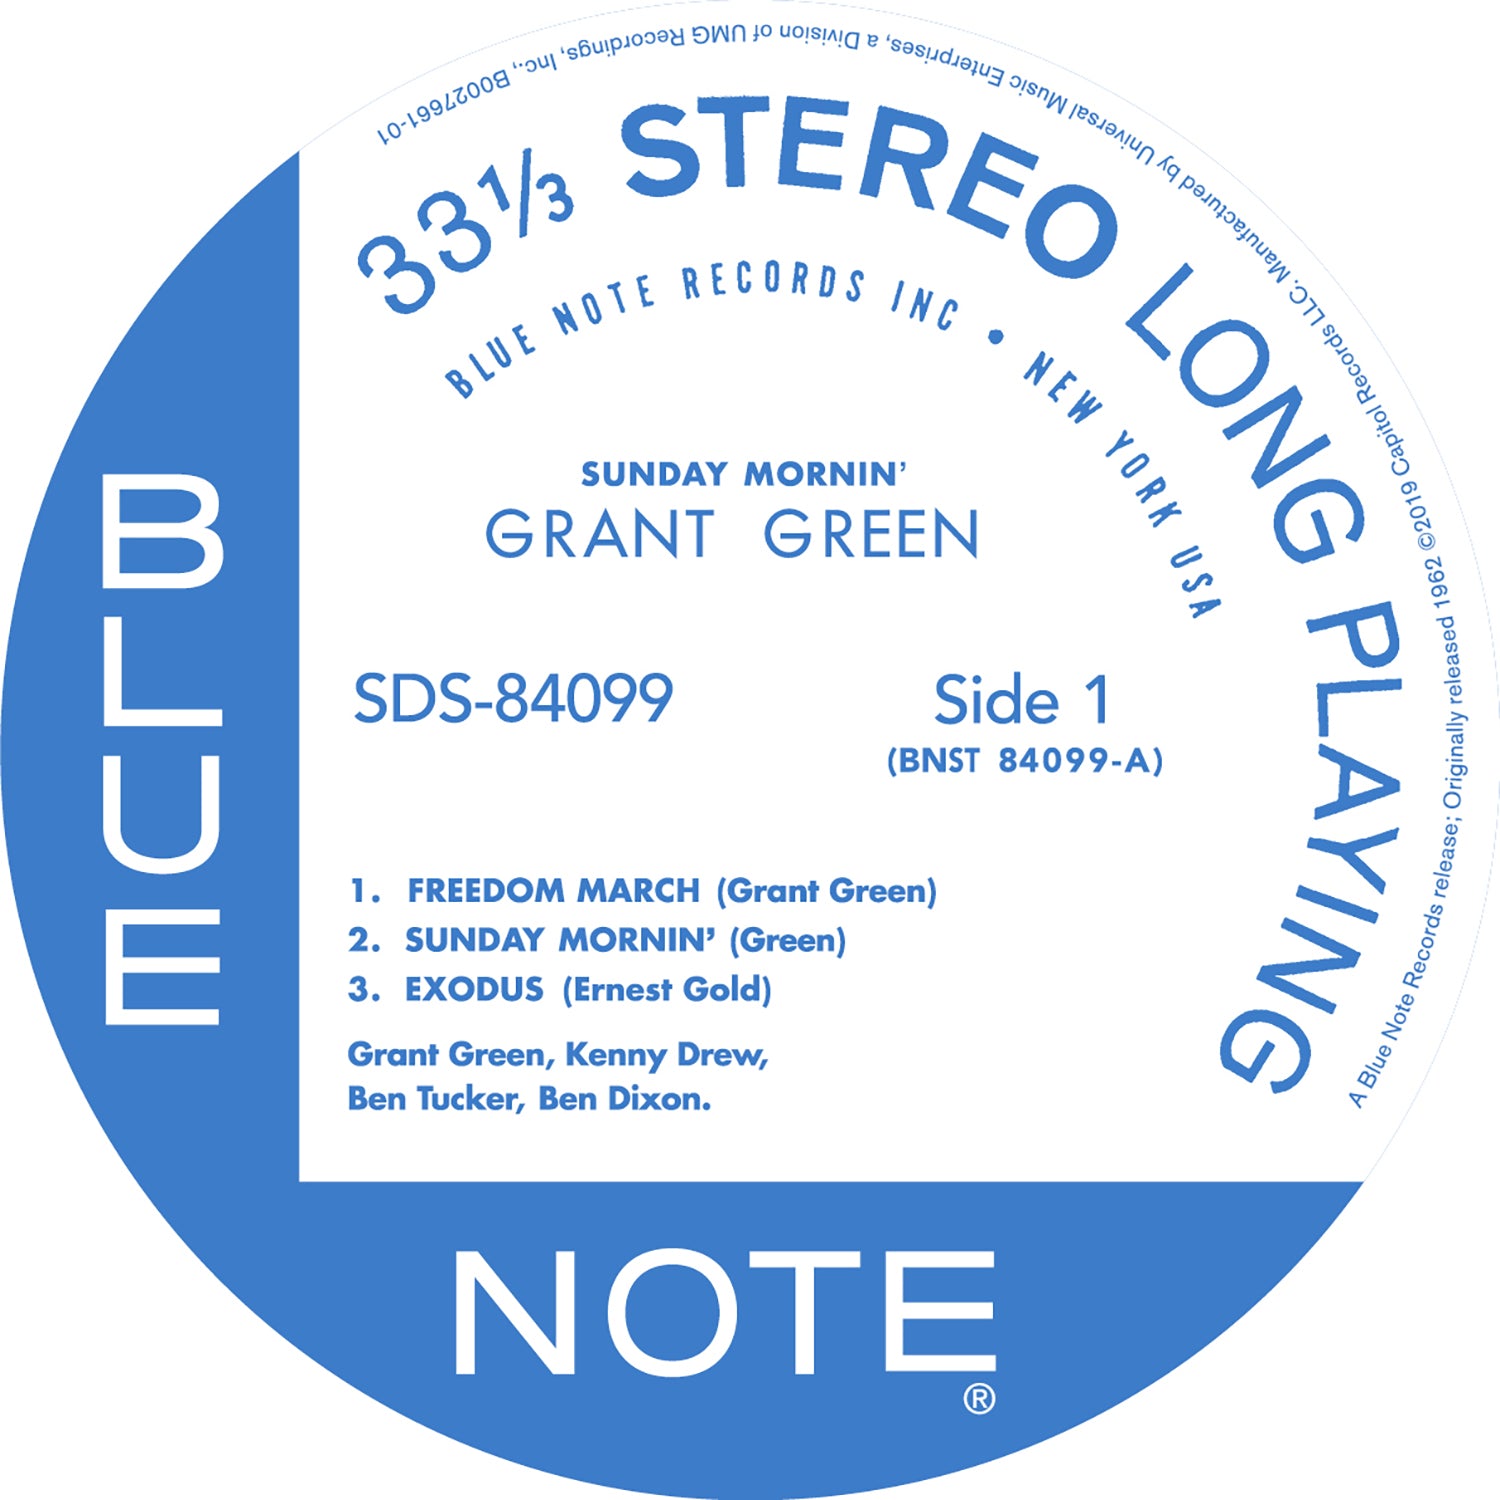 Original blue note pressing for grant green's sunday mornin, side 1 with top track freedom march, a blue note pressing